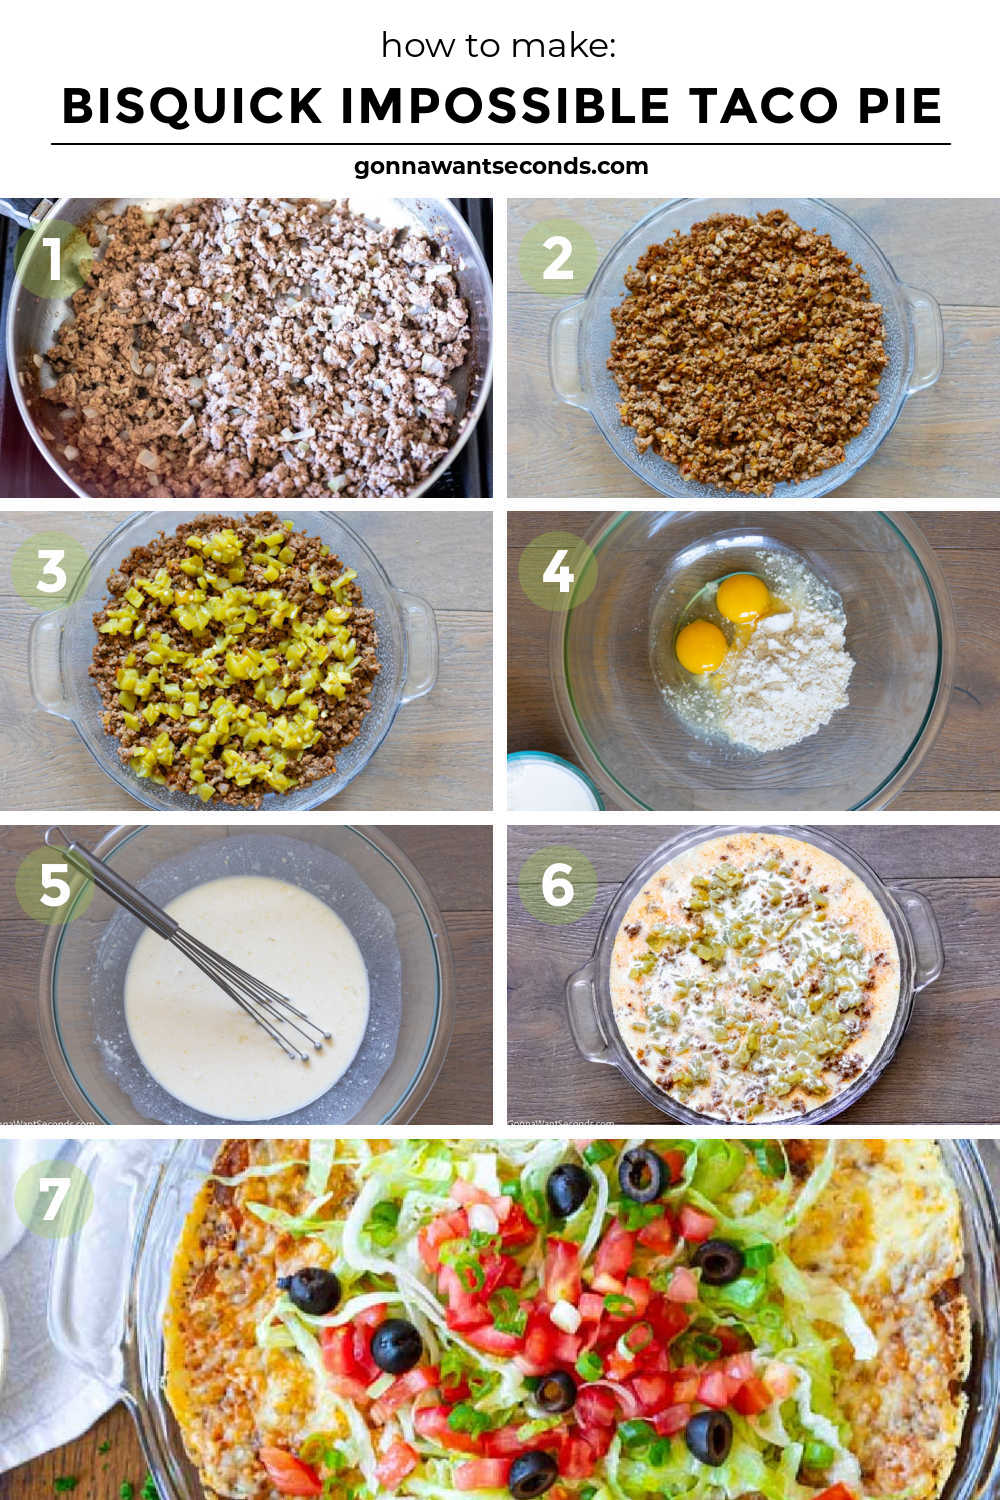 Step by step how to make Bisquick impossible taco pie